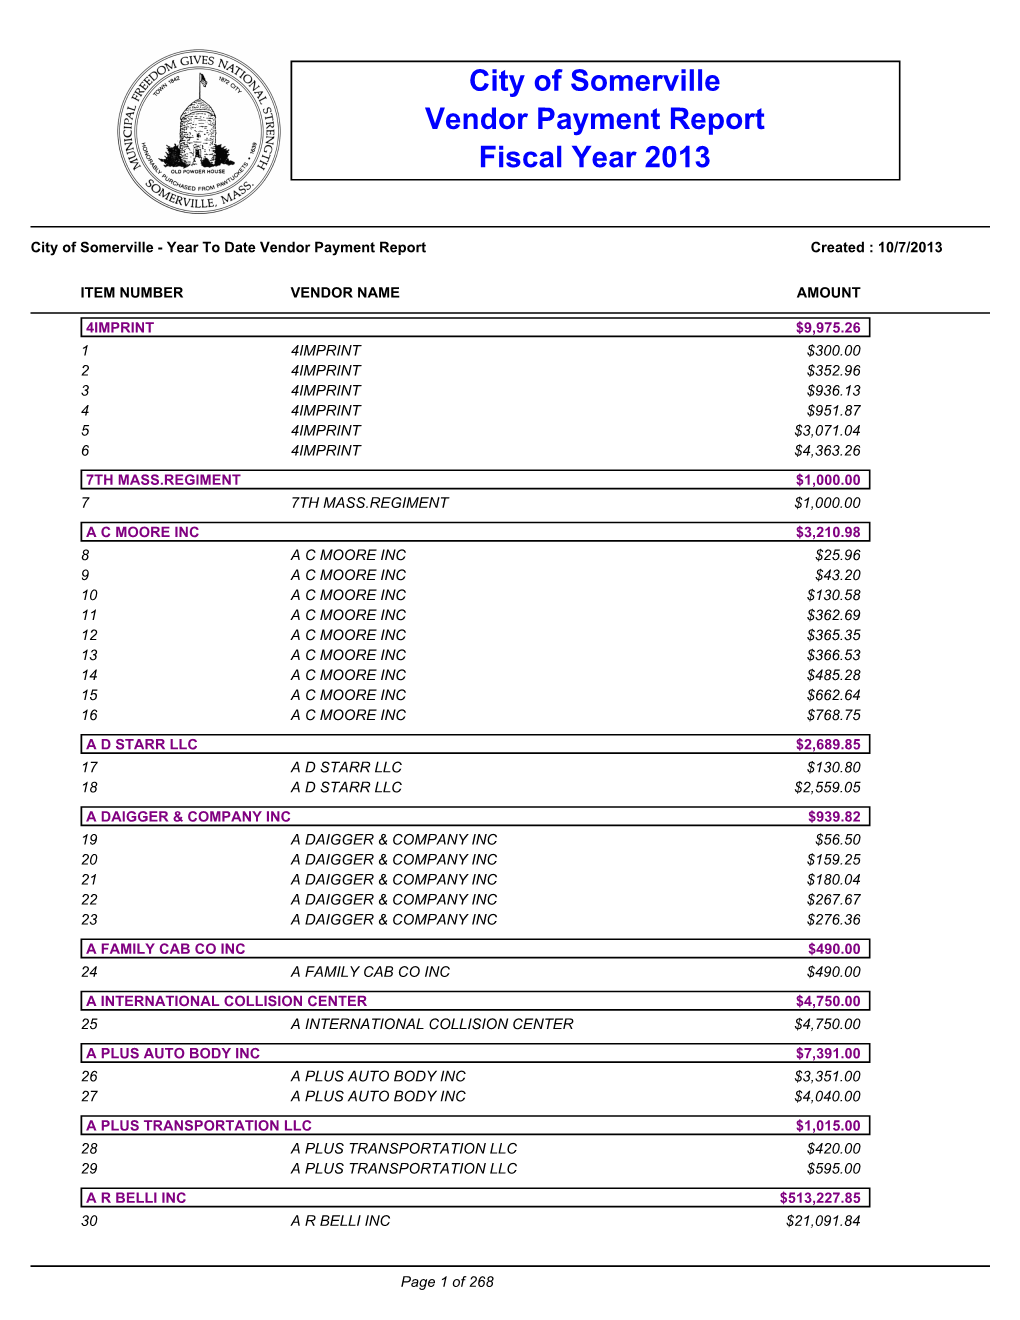 City of Somerville Vendor Payment Report Fiscal Year 2013